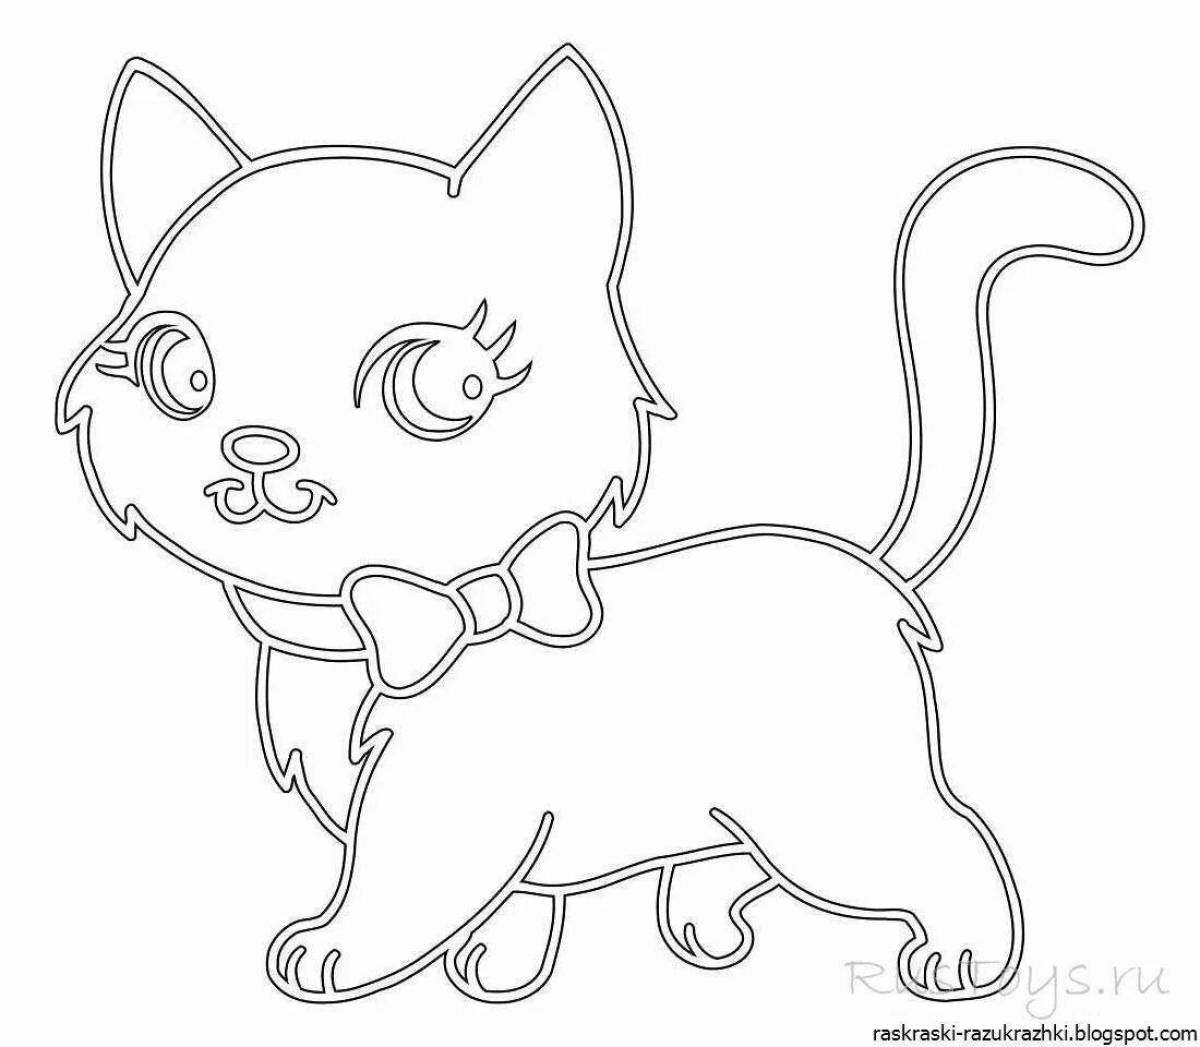 Snuggly little kitty coloring page